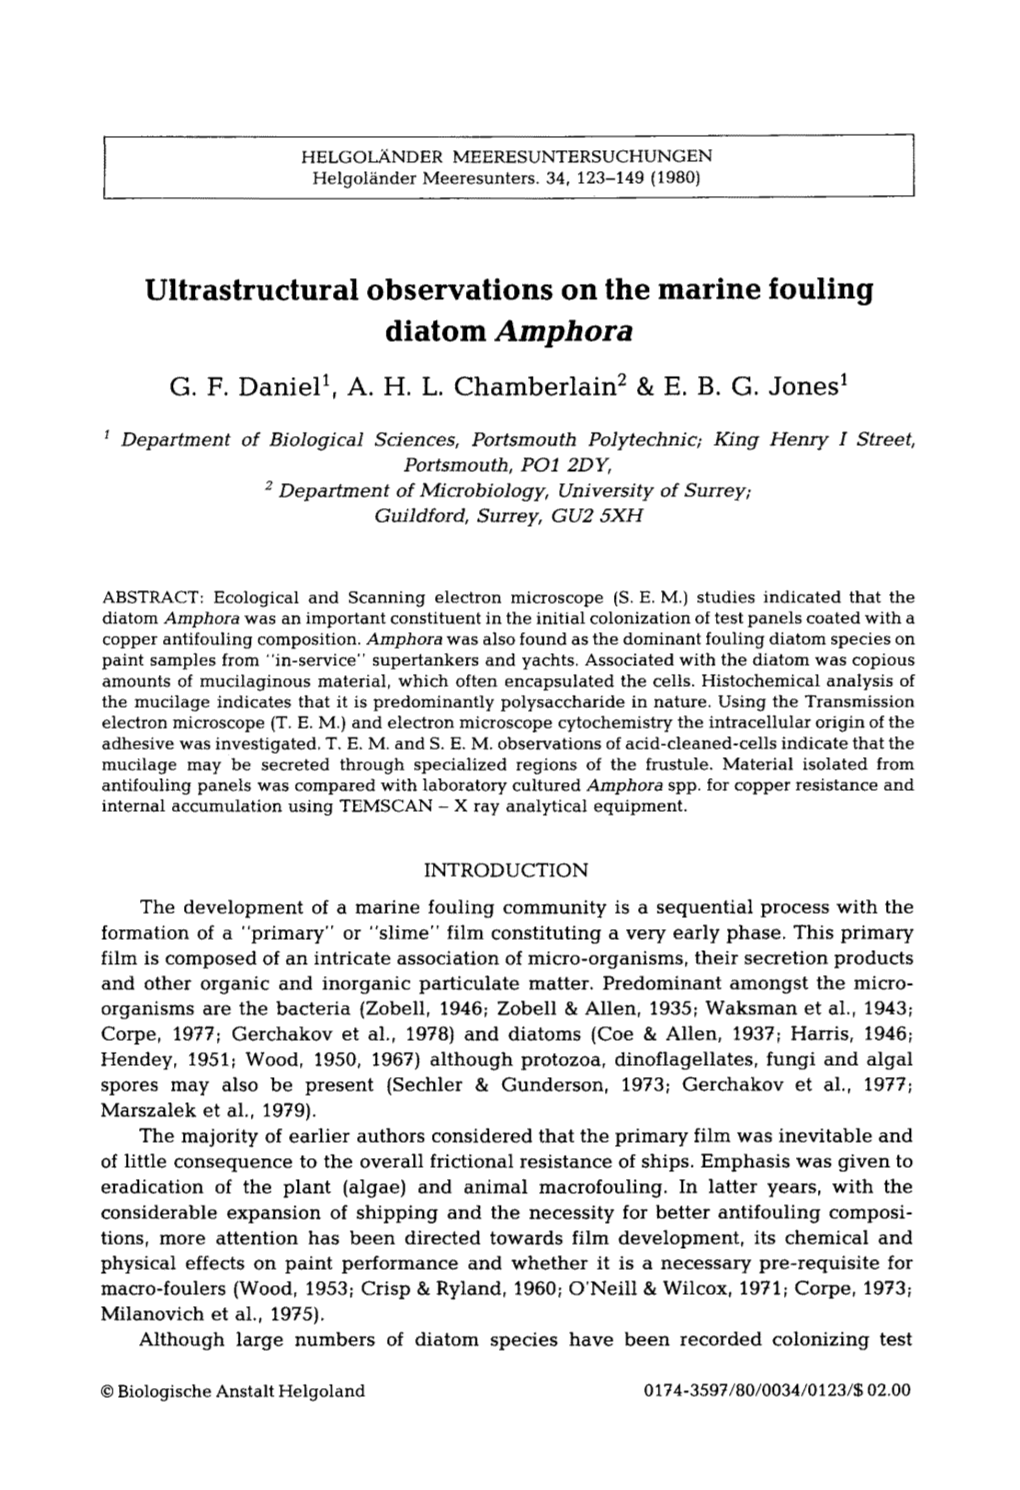 Ultrastructural Observations on the Marine Fouling Diatom Amphora